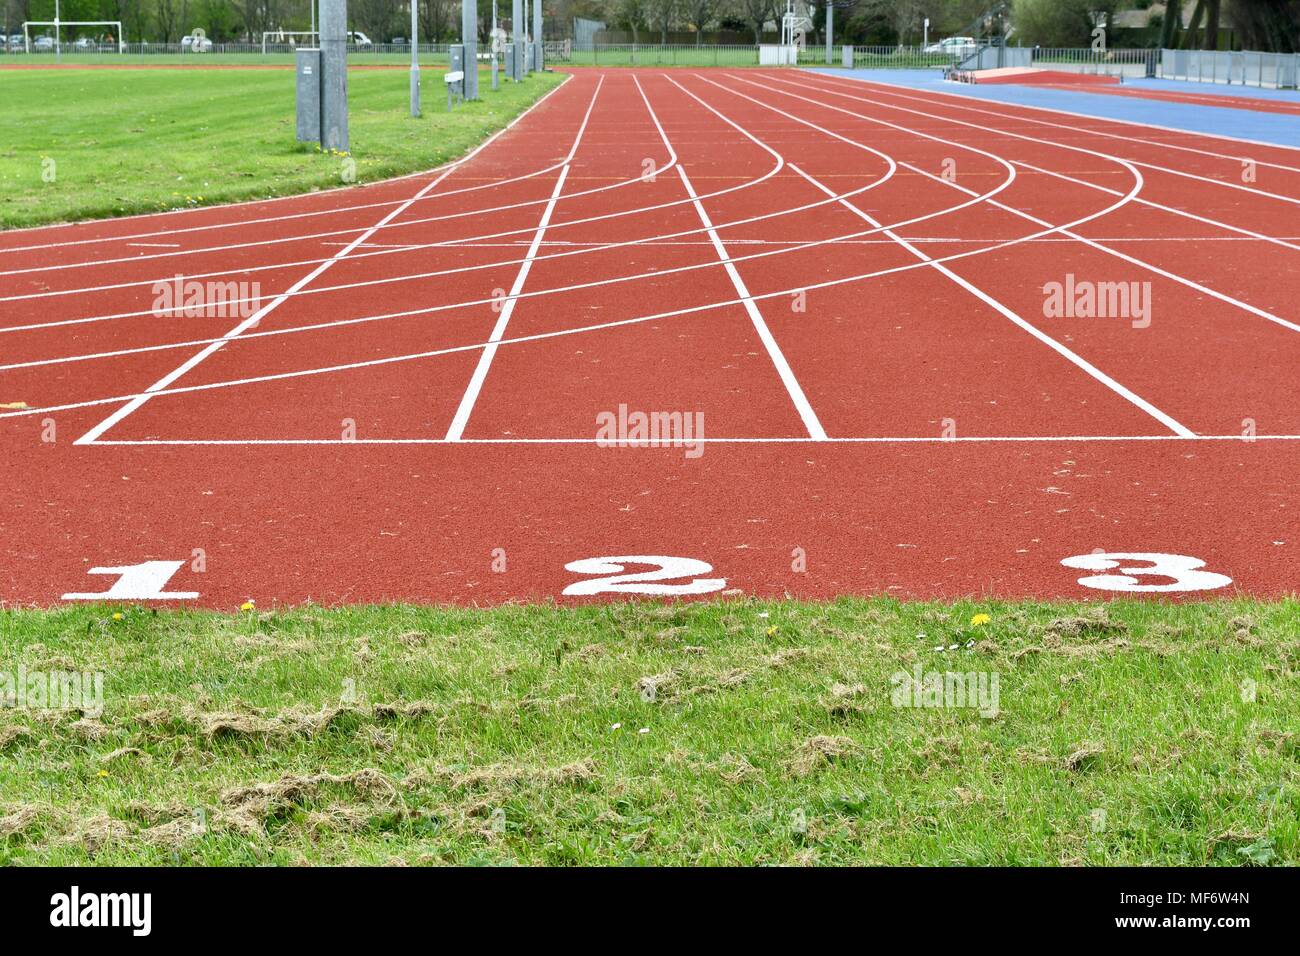 Lanes one, two and three of Par athletic track Stock Photo